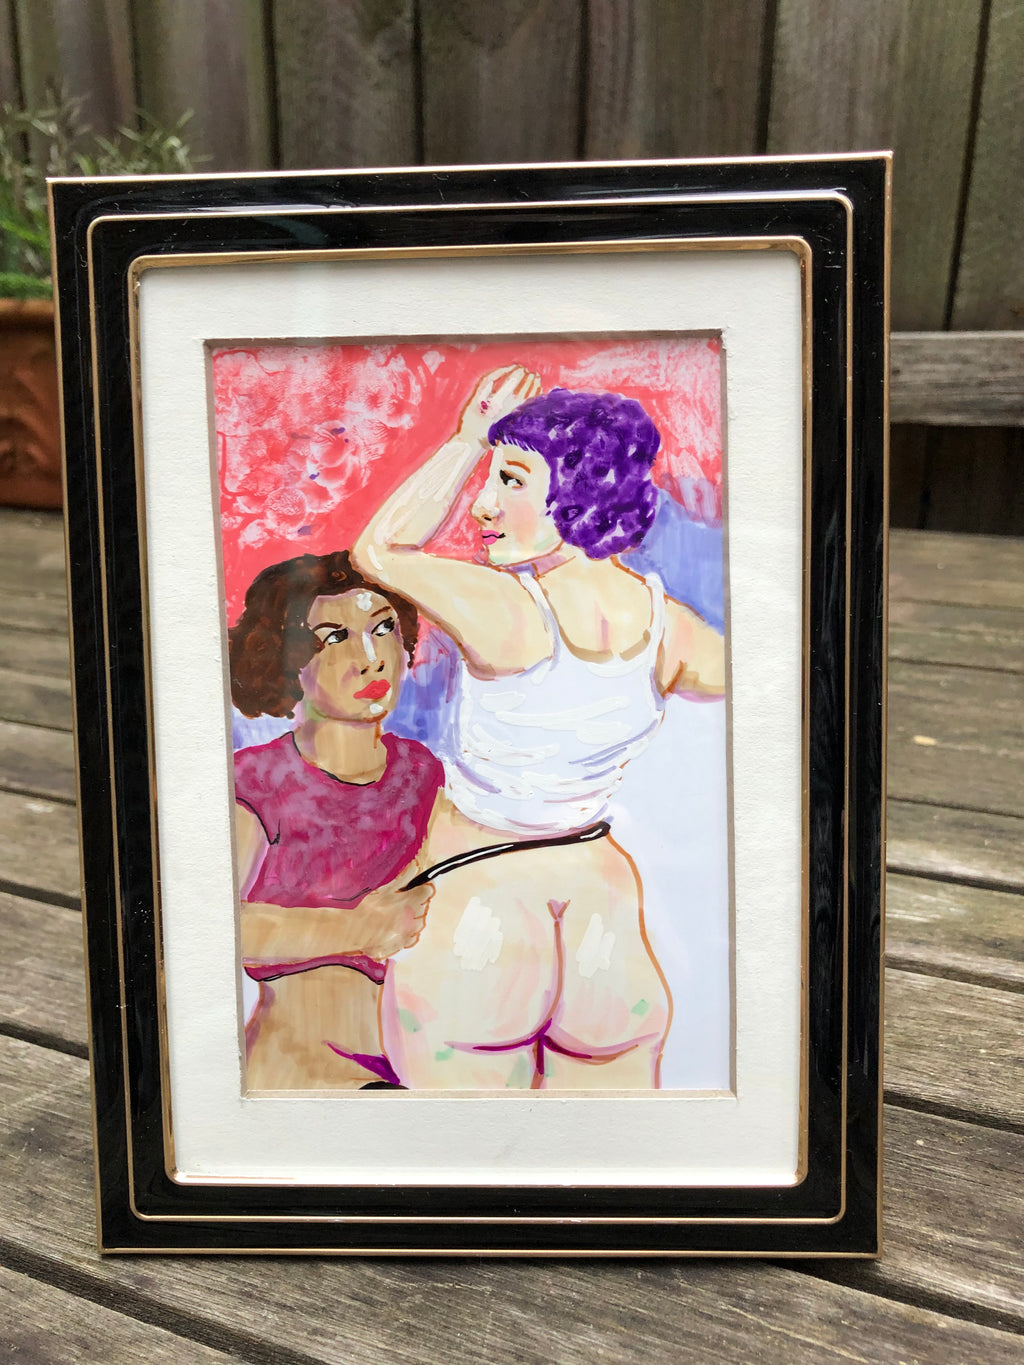 (ADULT) You Know it Makes My Heart Quick Framed Original Art by Stevie Laney